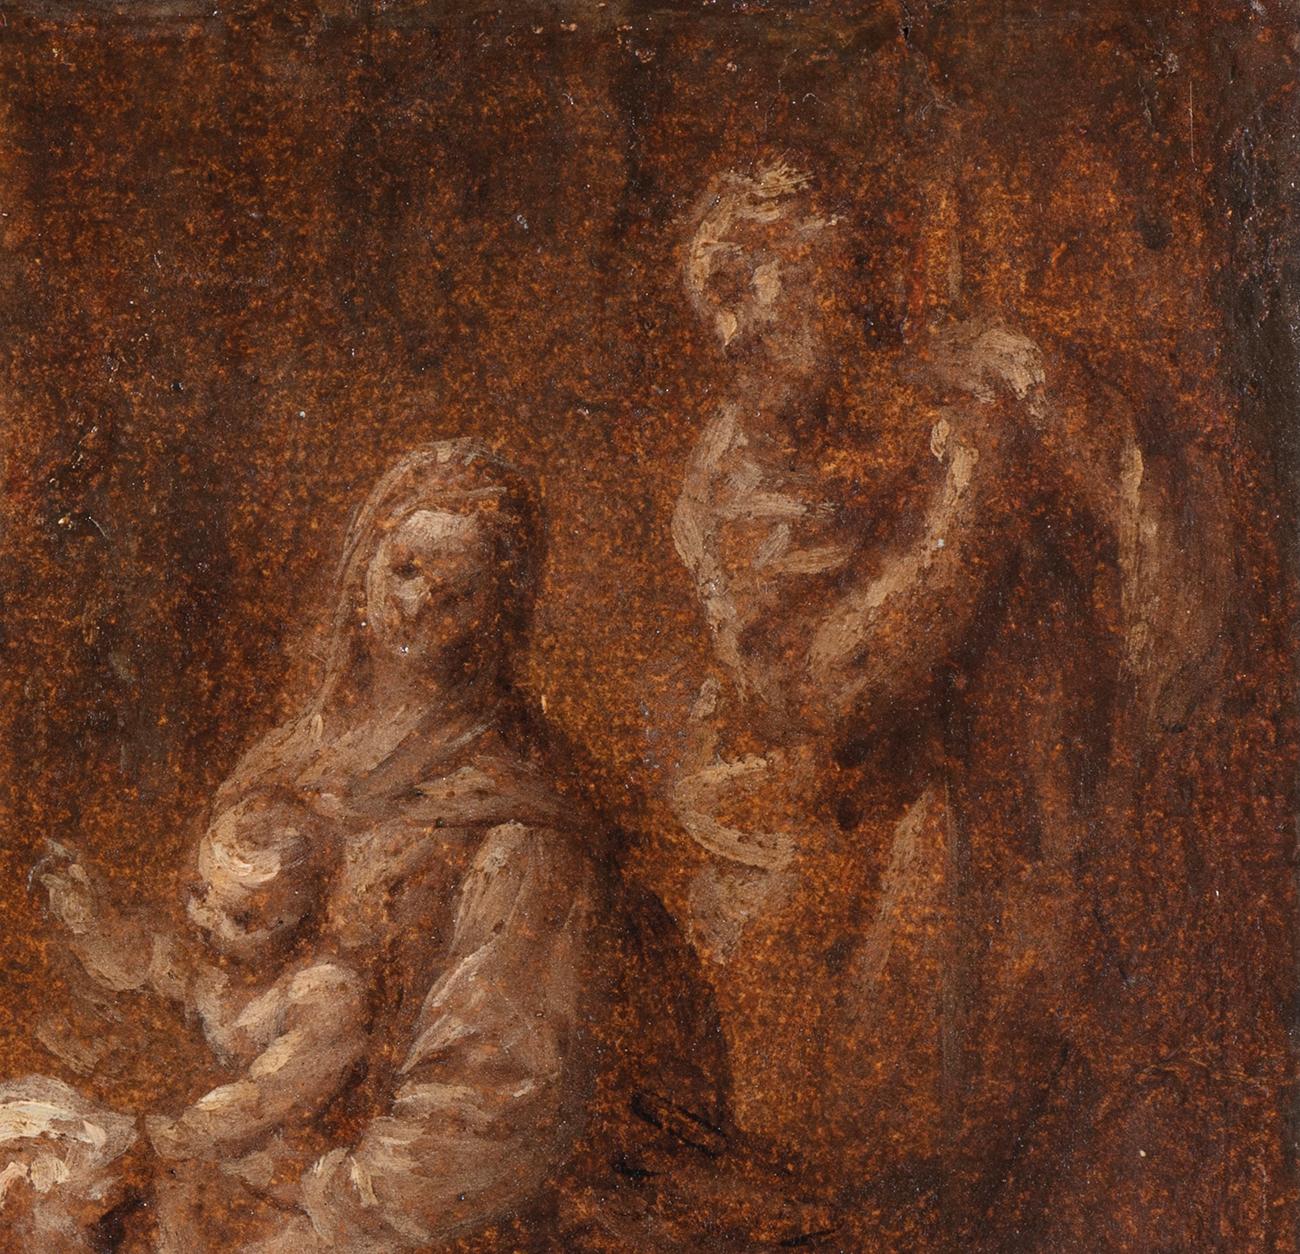 Simone Cantarini (Pesaro 1612 - Verona 1648)
Adoration of the Magi 
Oil on paper applied to canvas, cm. 16,5 x 24  – with frame cm. 22 x 29
Antique shaped and silvered wooden frame

Expertise: Anna Orlando
Publications: Bozzetti, modelletti,